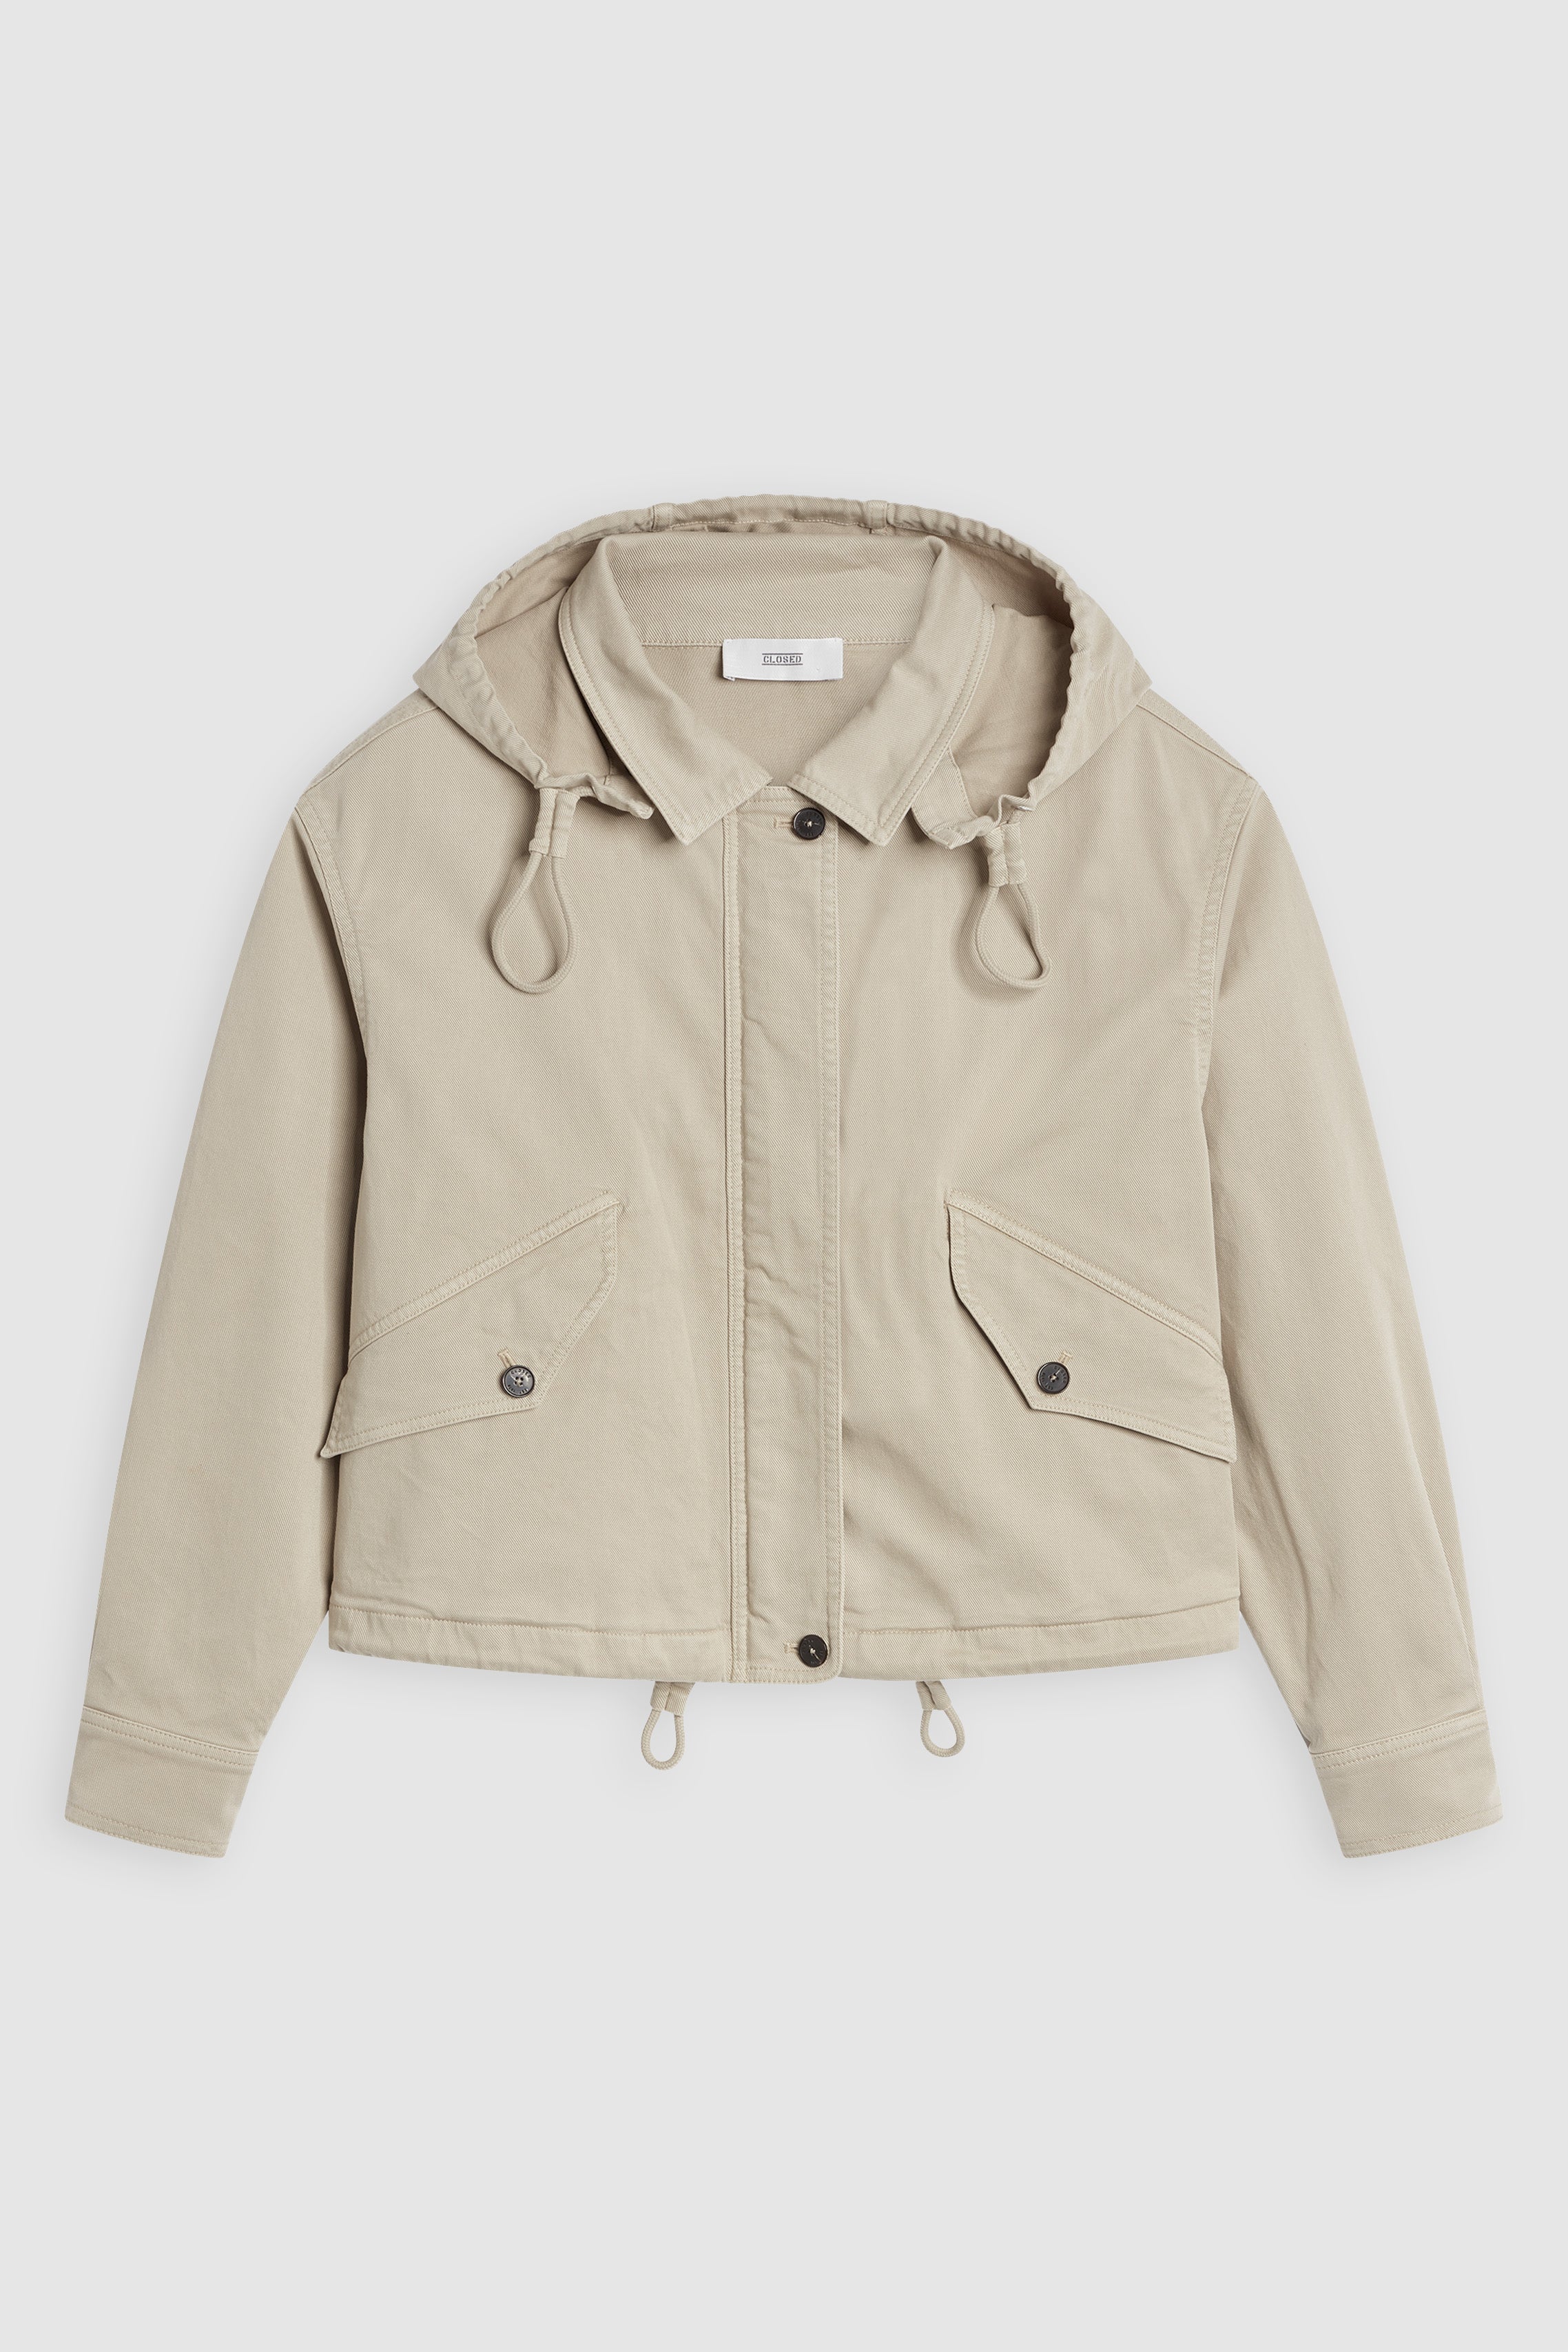 CLOSED-CROPPED JACKET WITH HOOD-Jacken & Mäntel-Outlet-Sale